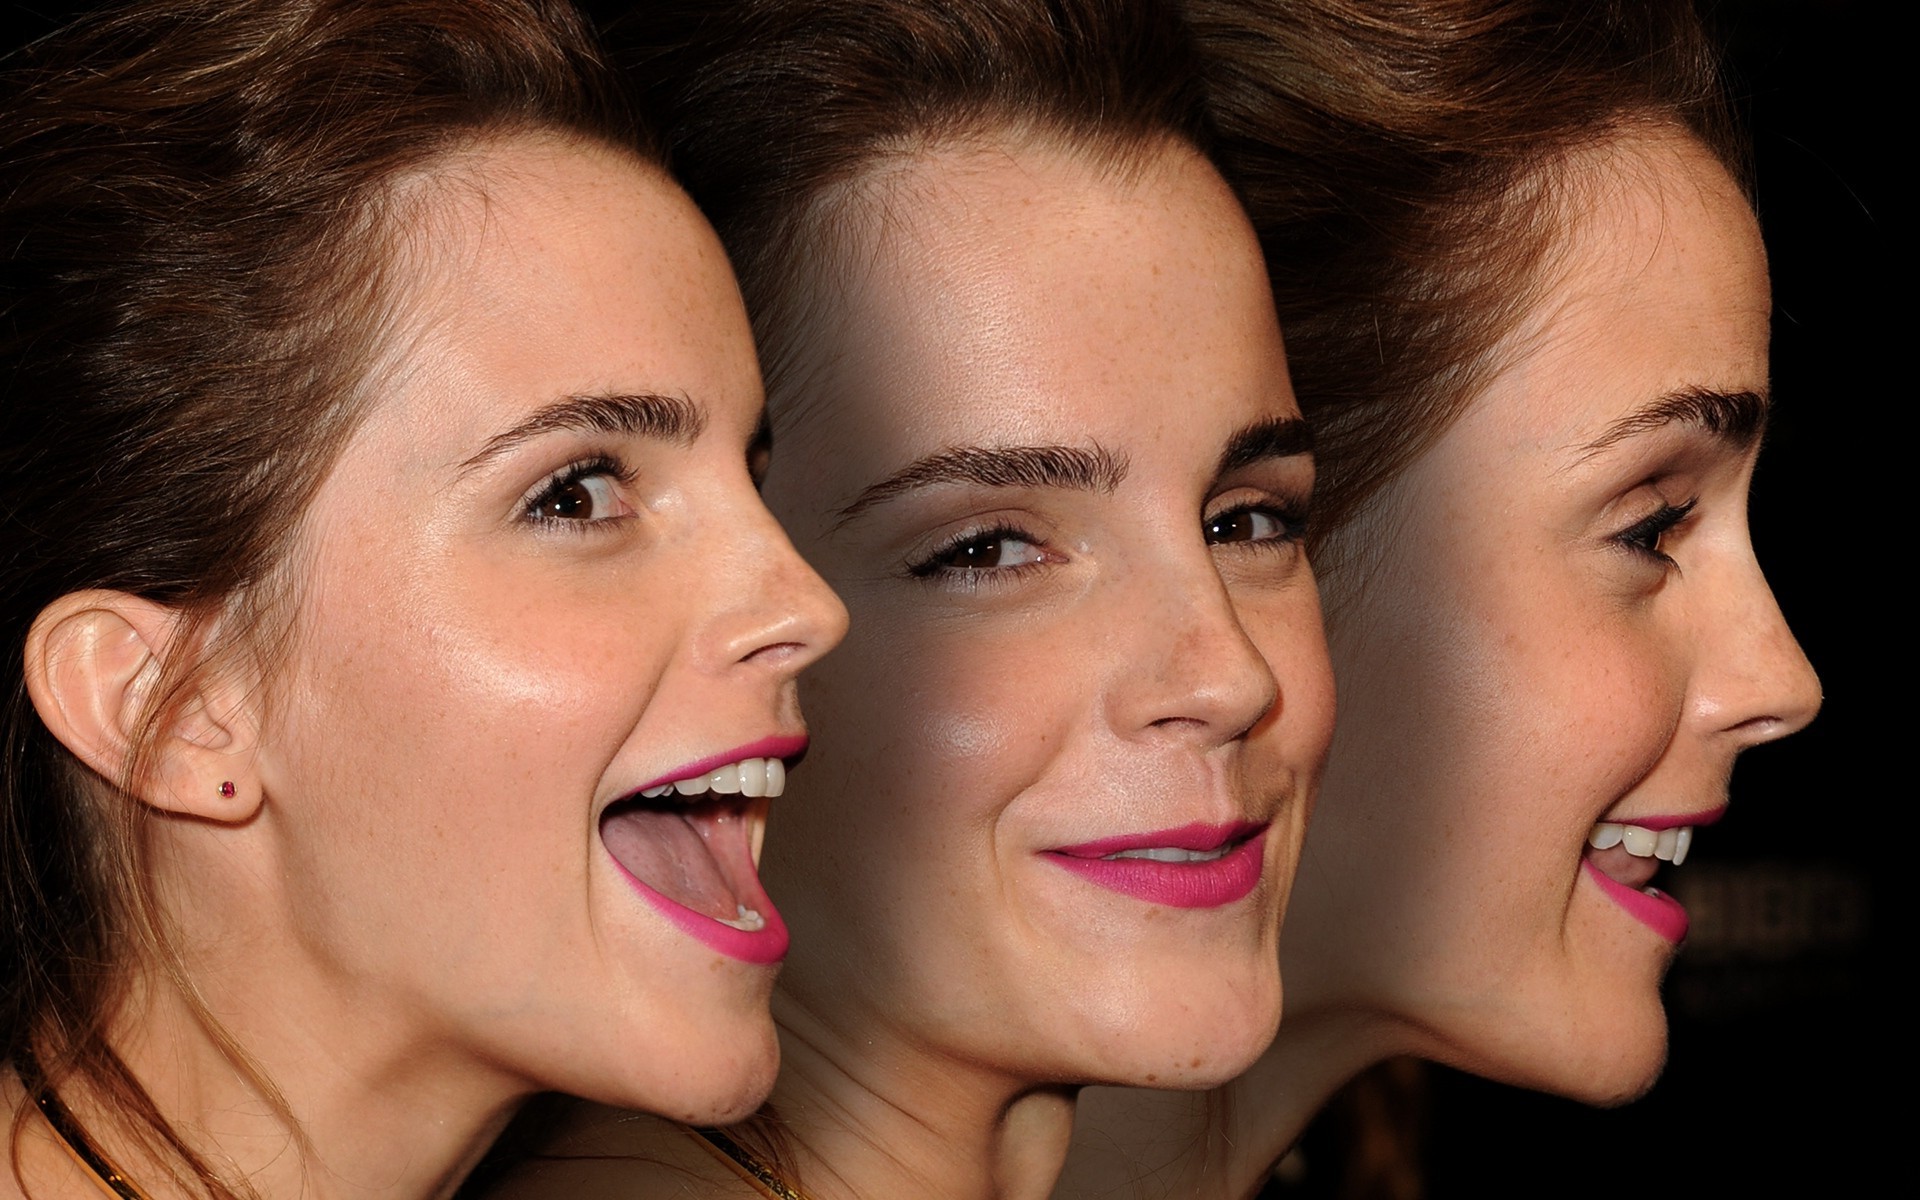 women, Actress, Brunette, Long Hair, Celebrity, Face, Emma Watson, Open Mouth, Profile, Collage, Smiling, Portrait, Red Lipstick, Photo Manipulation, Brown Eyes Wallpaper